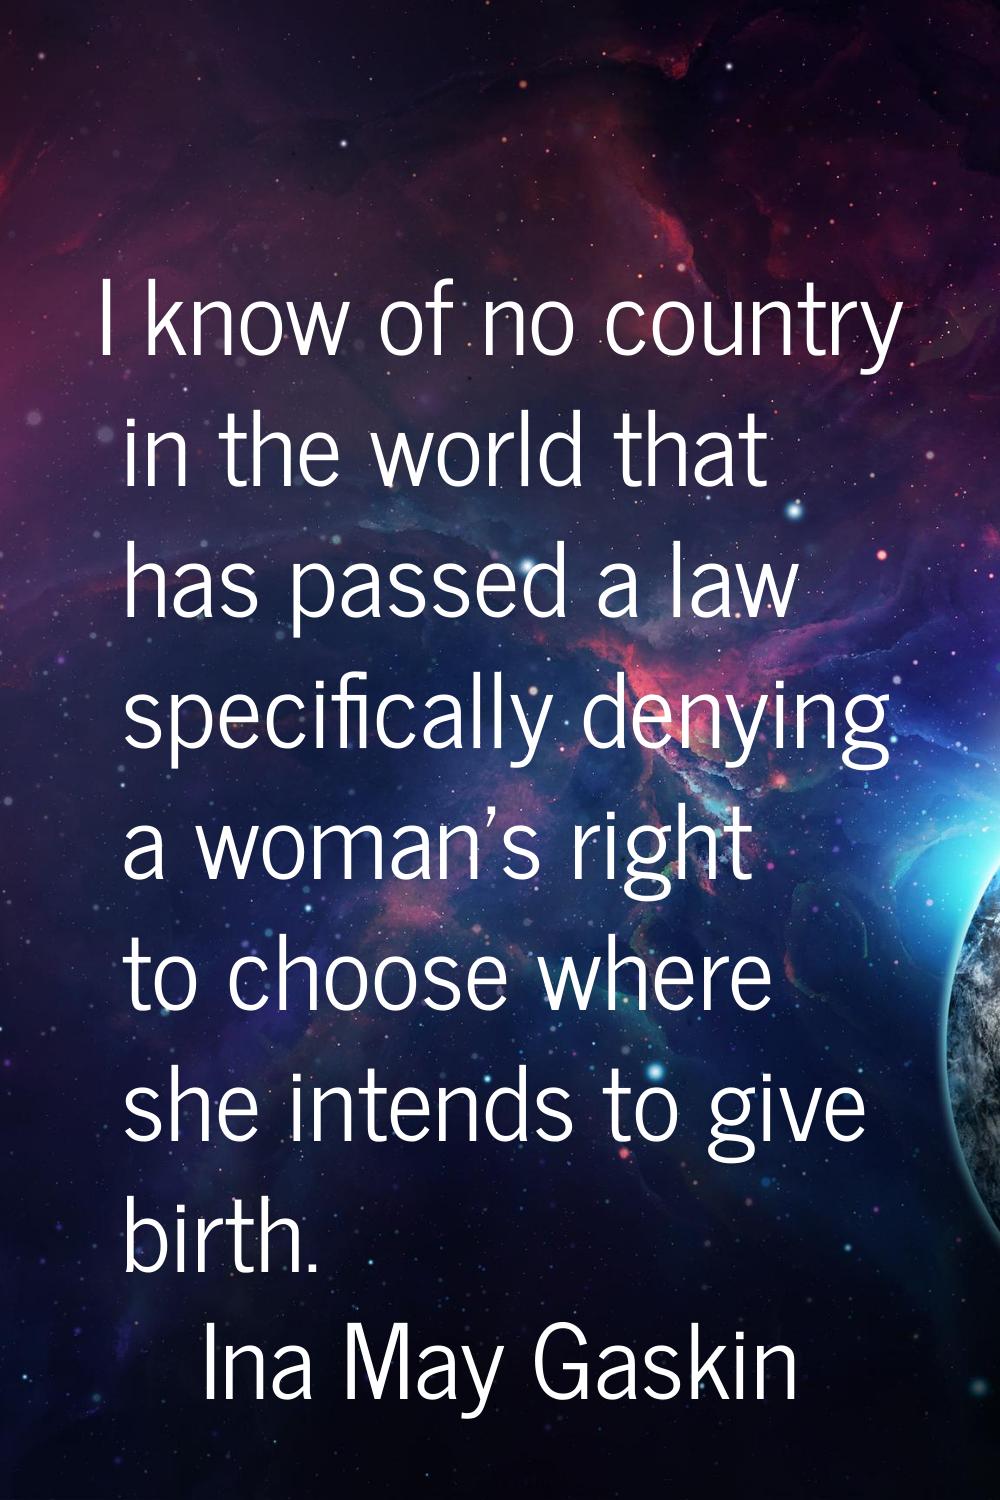 I know of no country in the world that has passed a law specifically denying a woman's right to cho